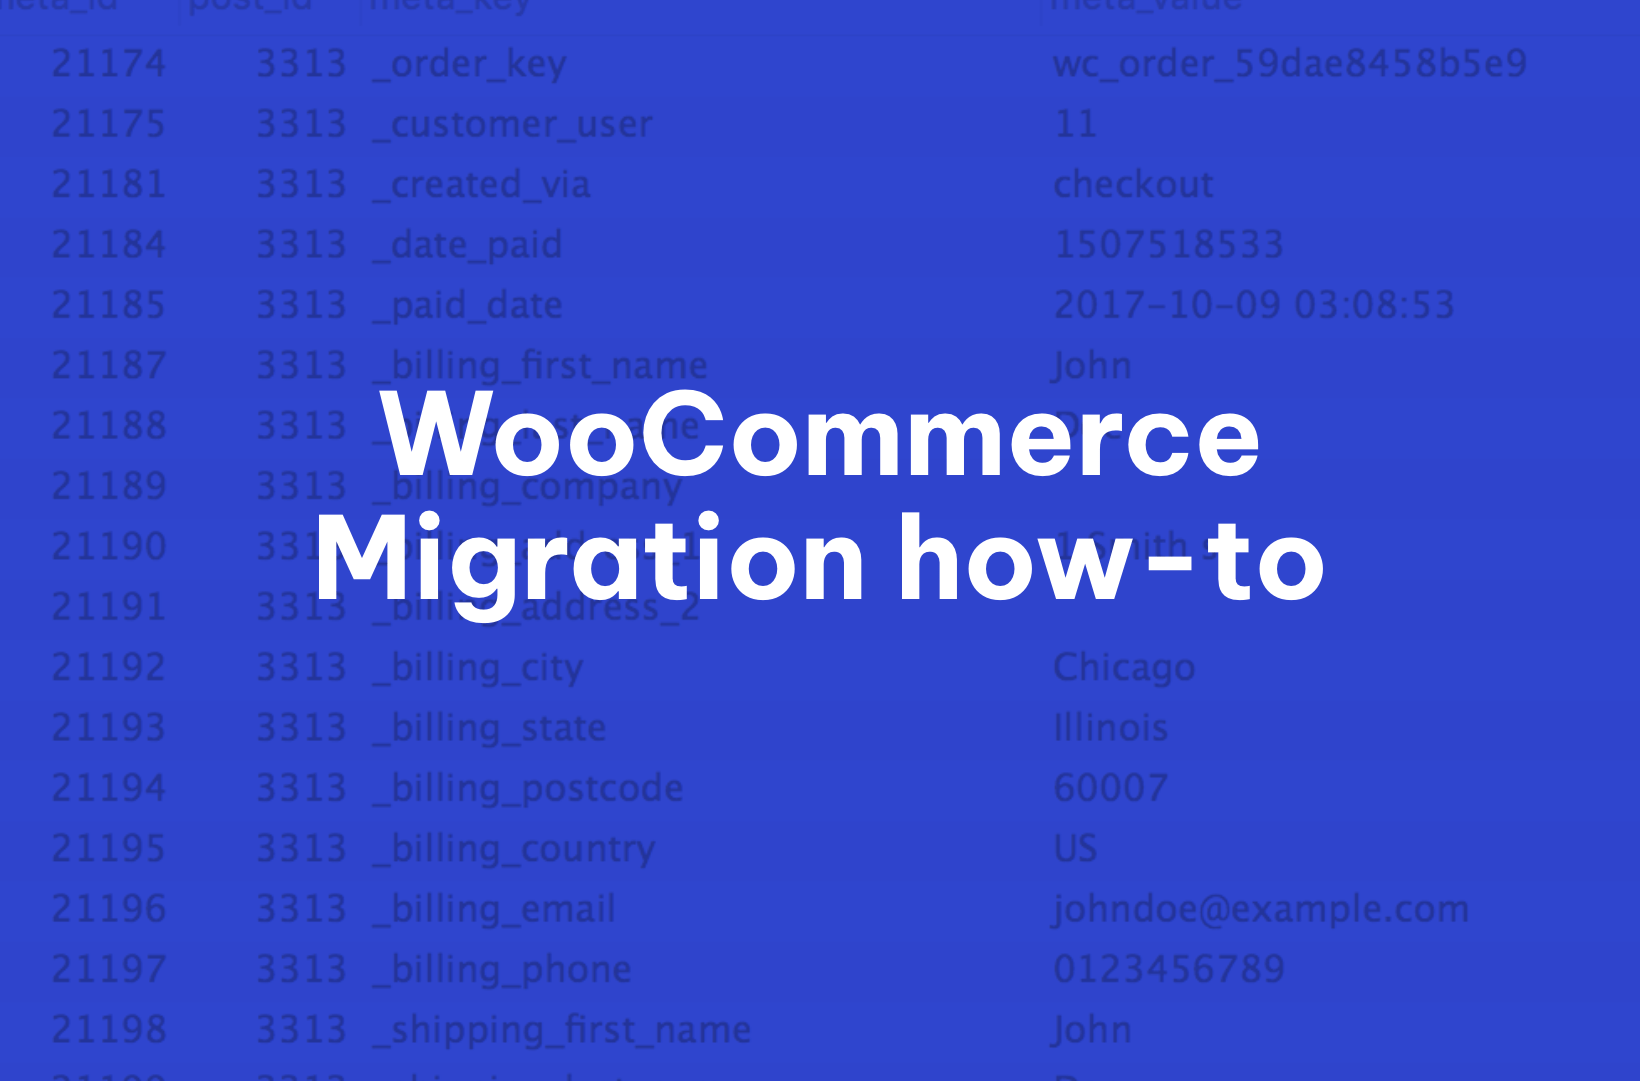 WooCommerce migration how-to